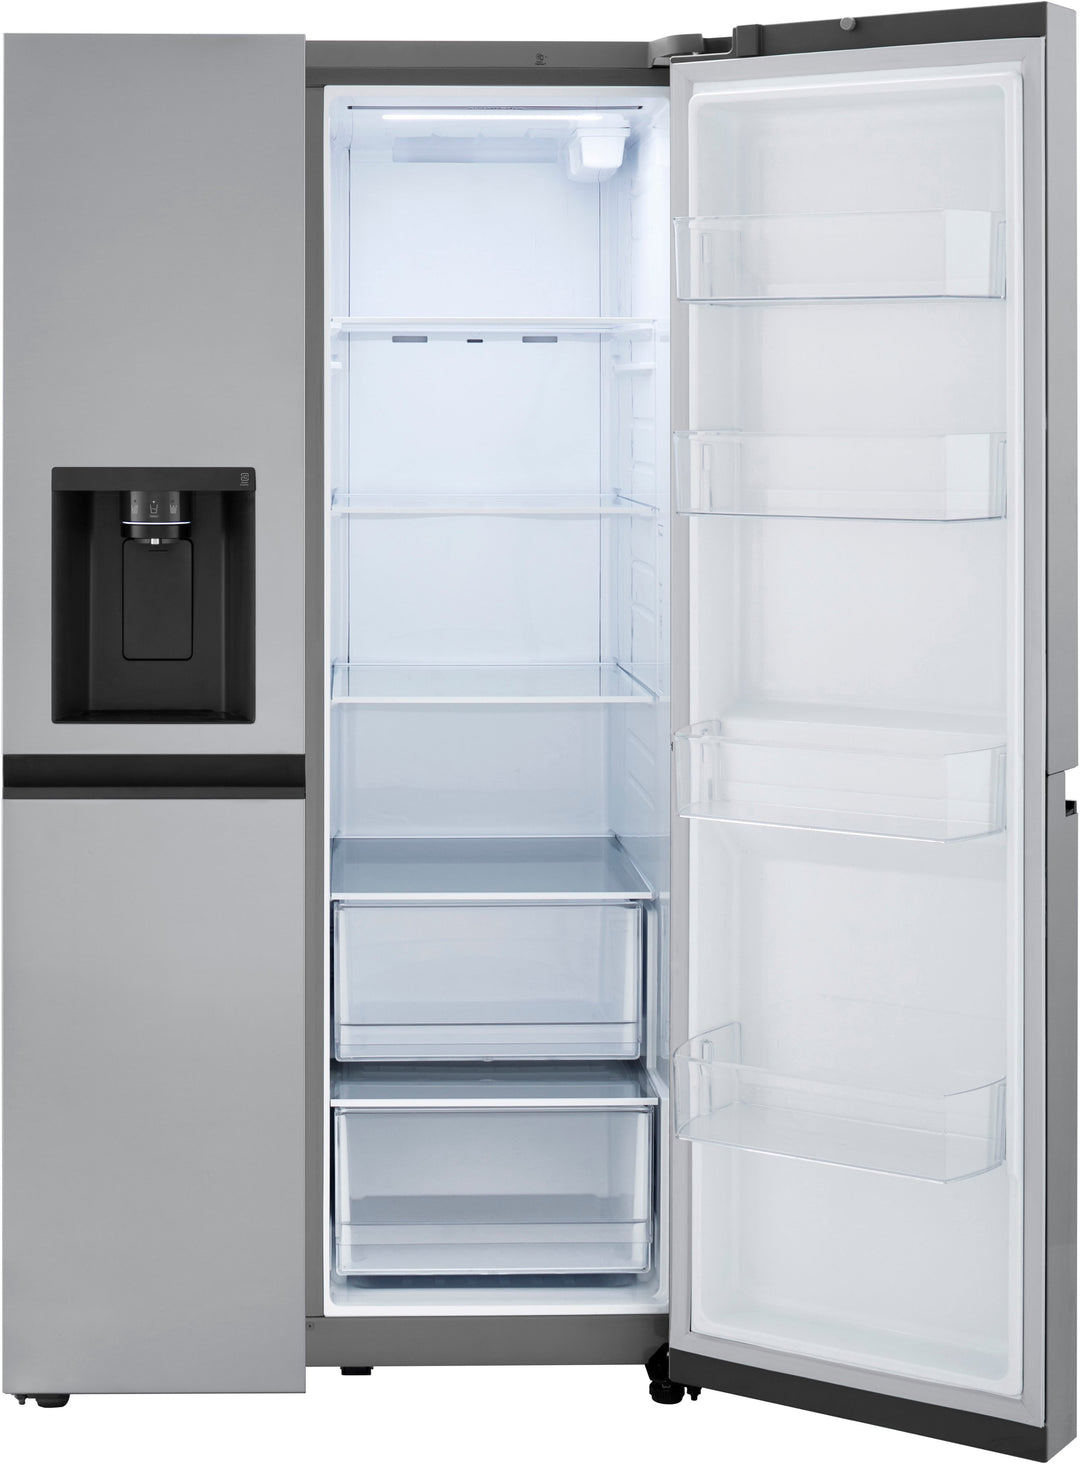 LG - 23 Cu. Ft. Side-by-Side Counter-Depth Refrigerator with Smooth Touch Dispenser - Stainless steel_9